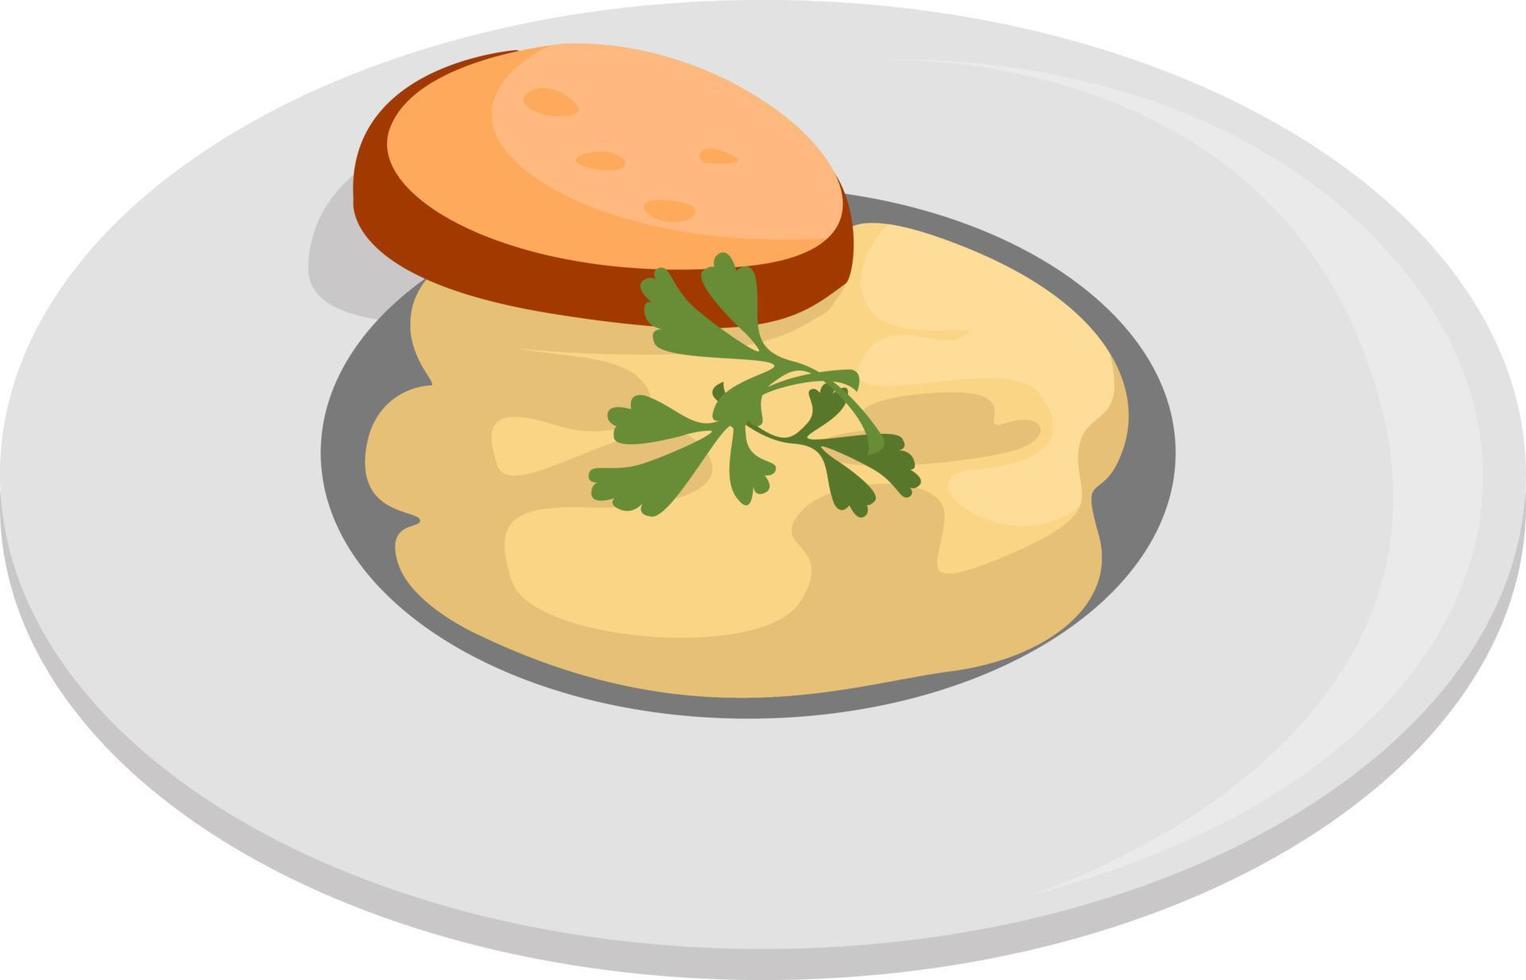 Fricassee food, illustration, vector on white background